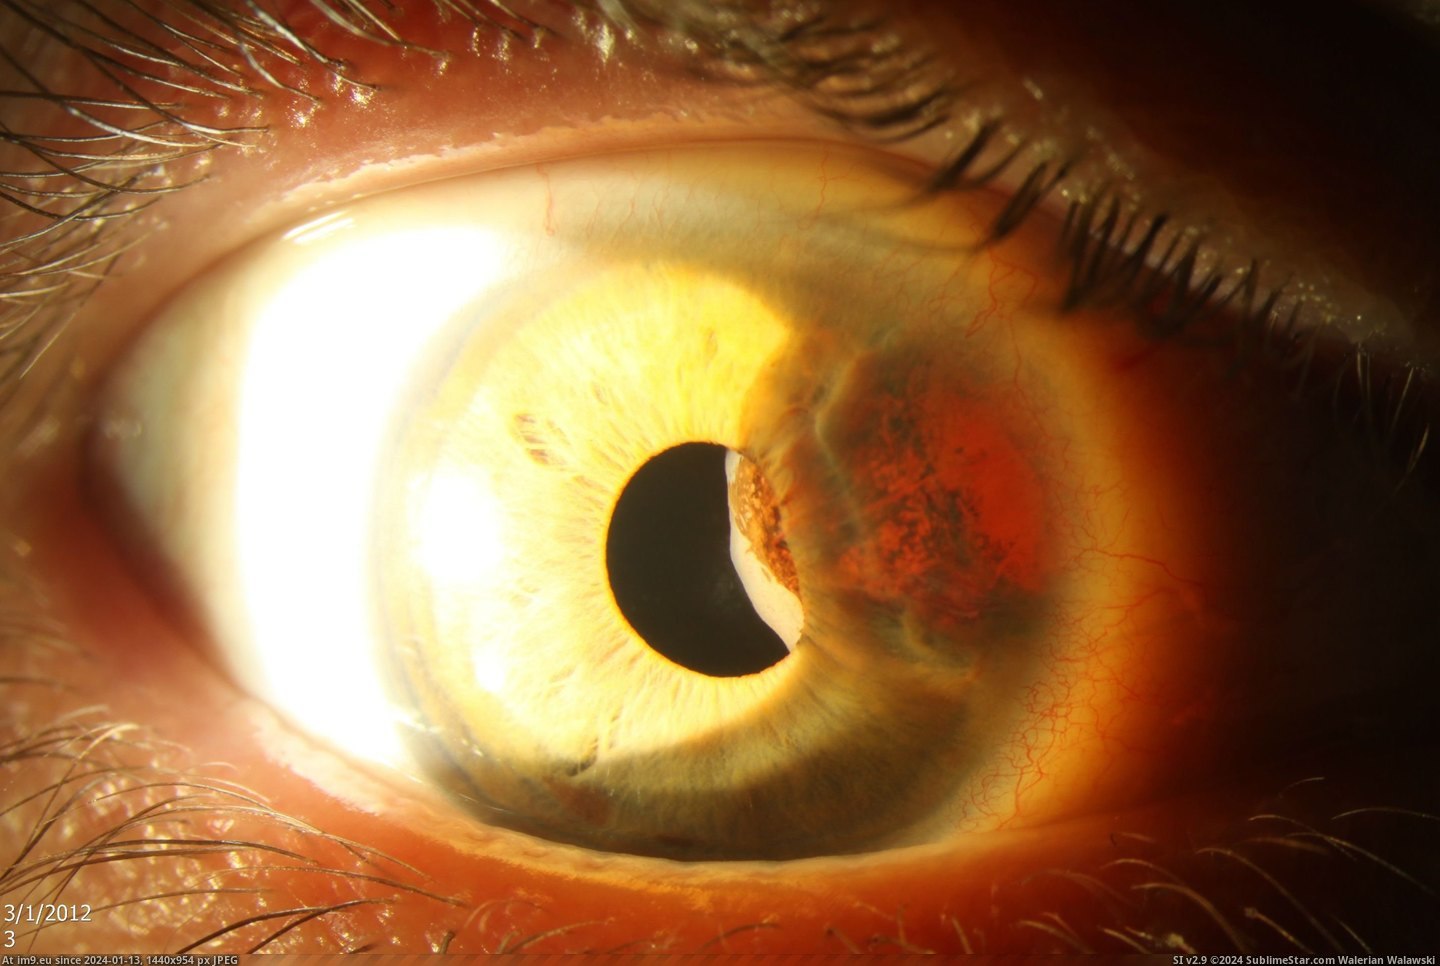 #Wtf #Was #Eye #Diameter #5mm #Treatments #Tumour #Nsfl #Cancer #Began [Wtf] This is my eye before I began cancer treatments. The tumour was about 5mm in diameter. (NSFL) Pic. (Image of album My r/WTF favs))